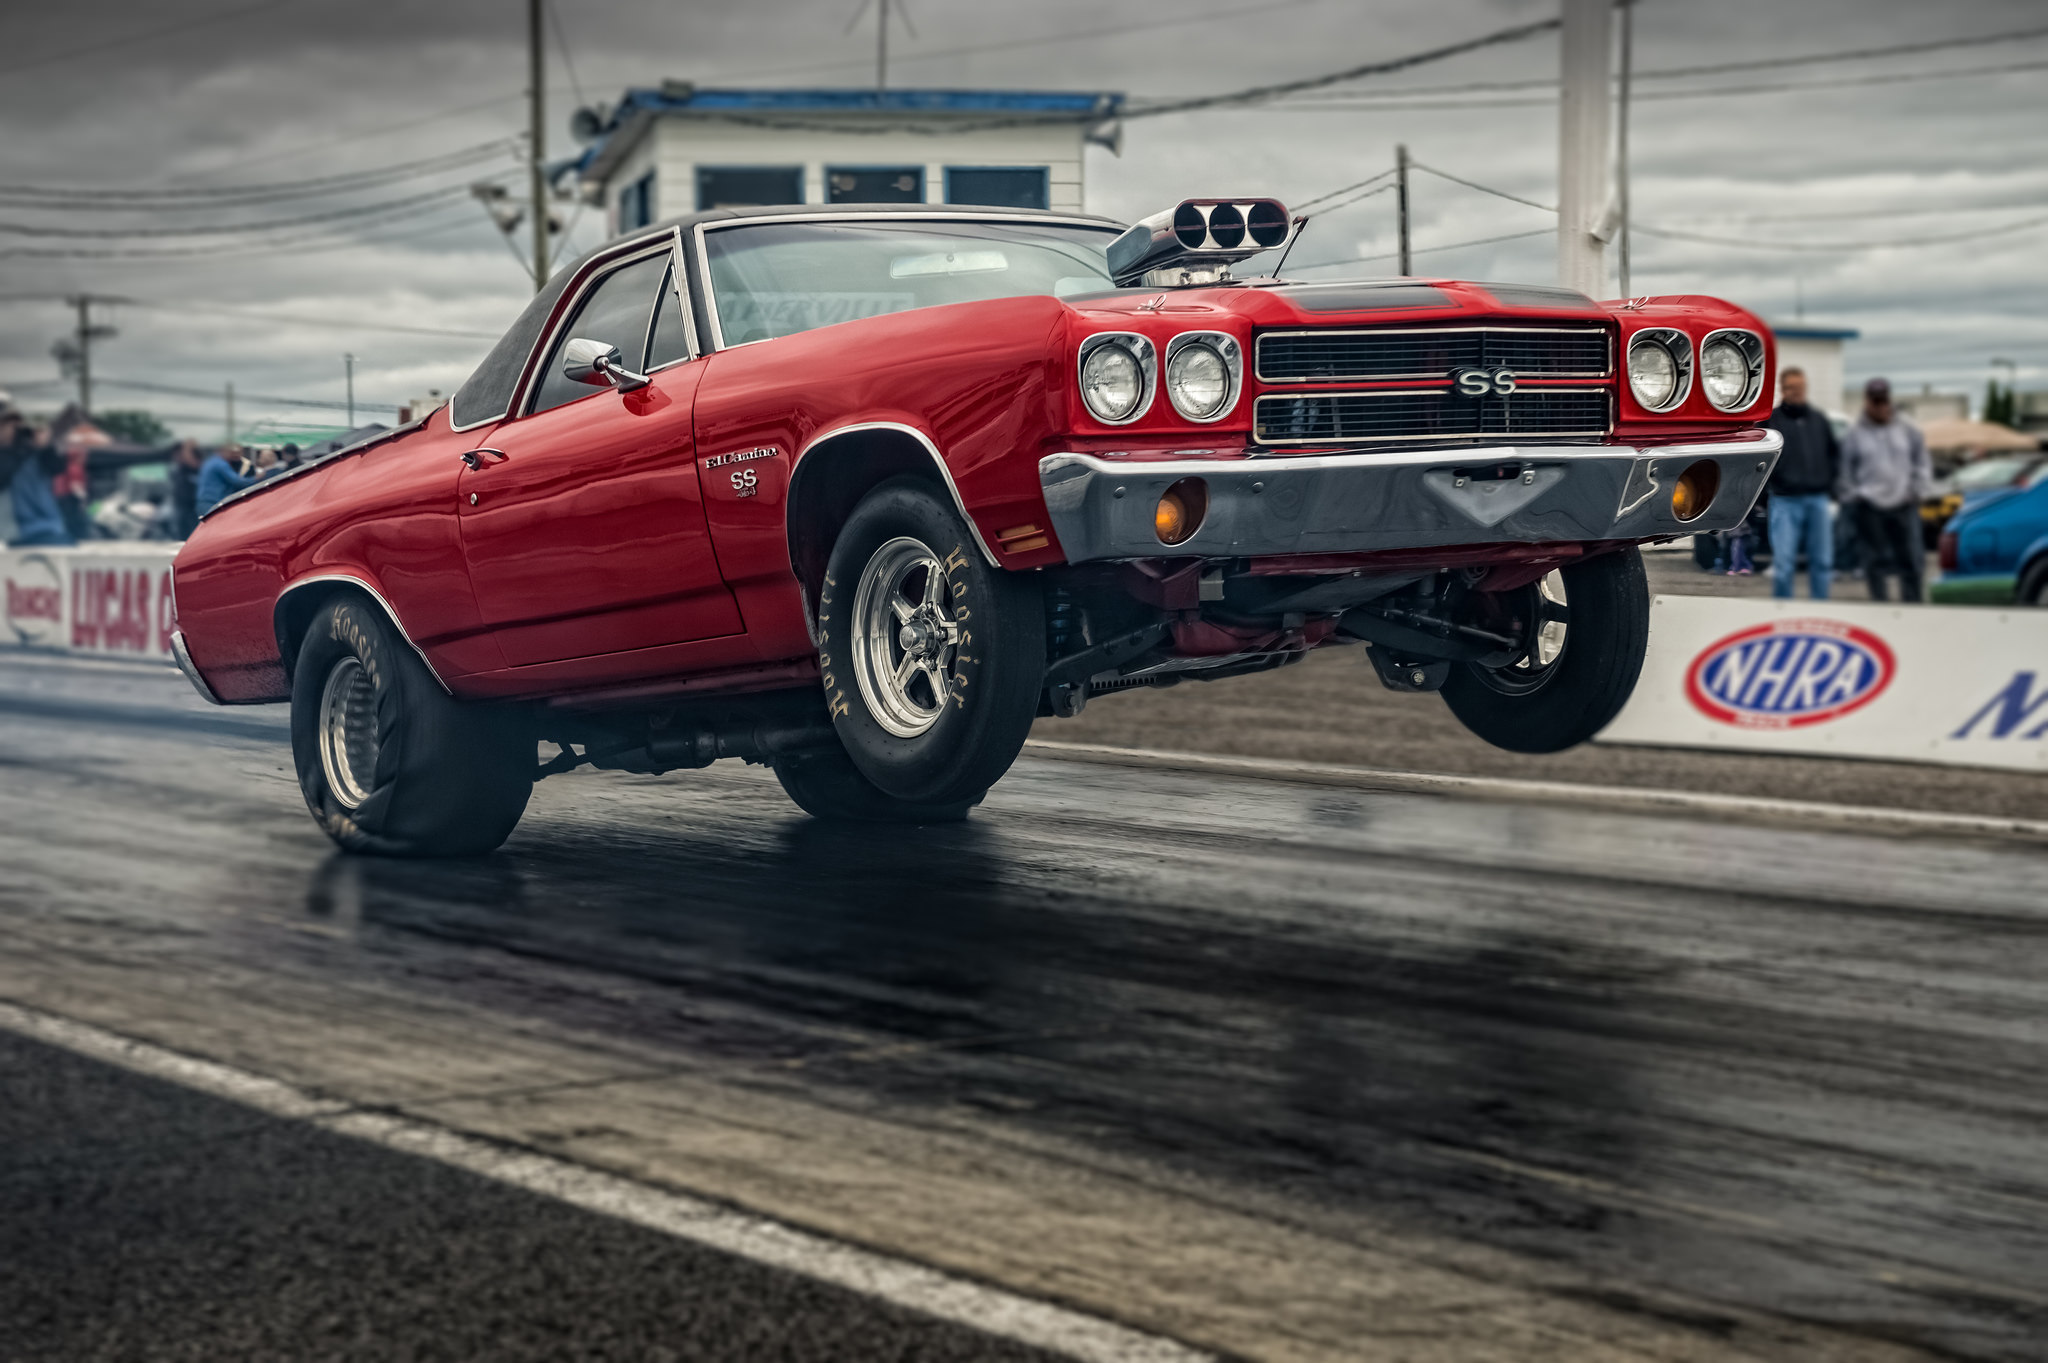 Car Muscle Drag Racing Race Pictures And Photos Chevrolet